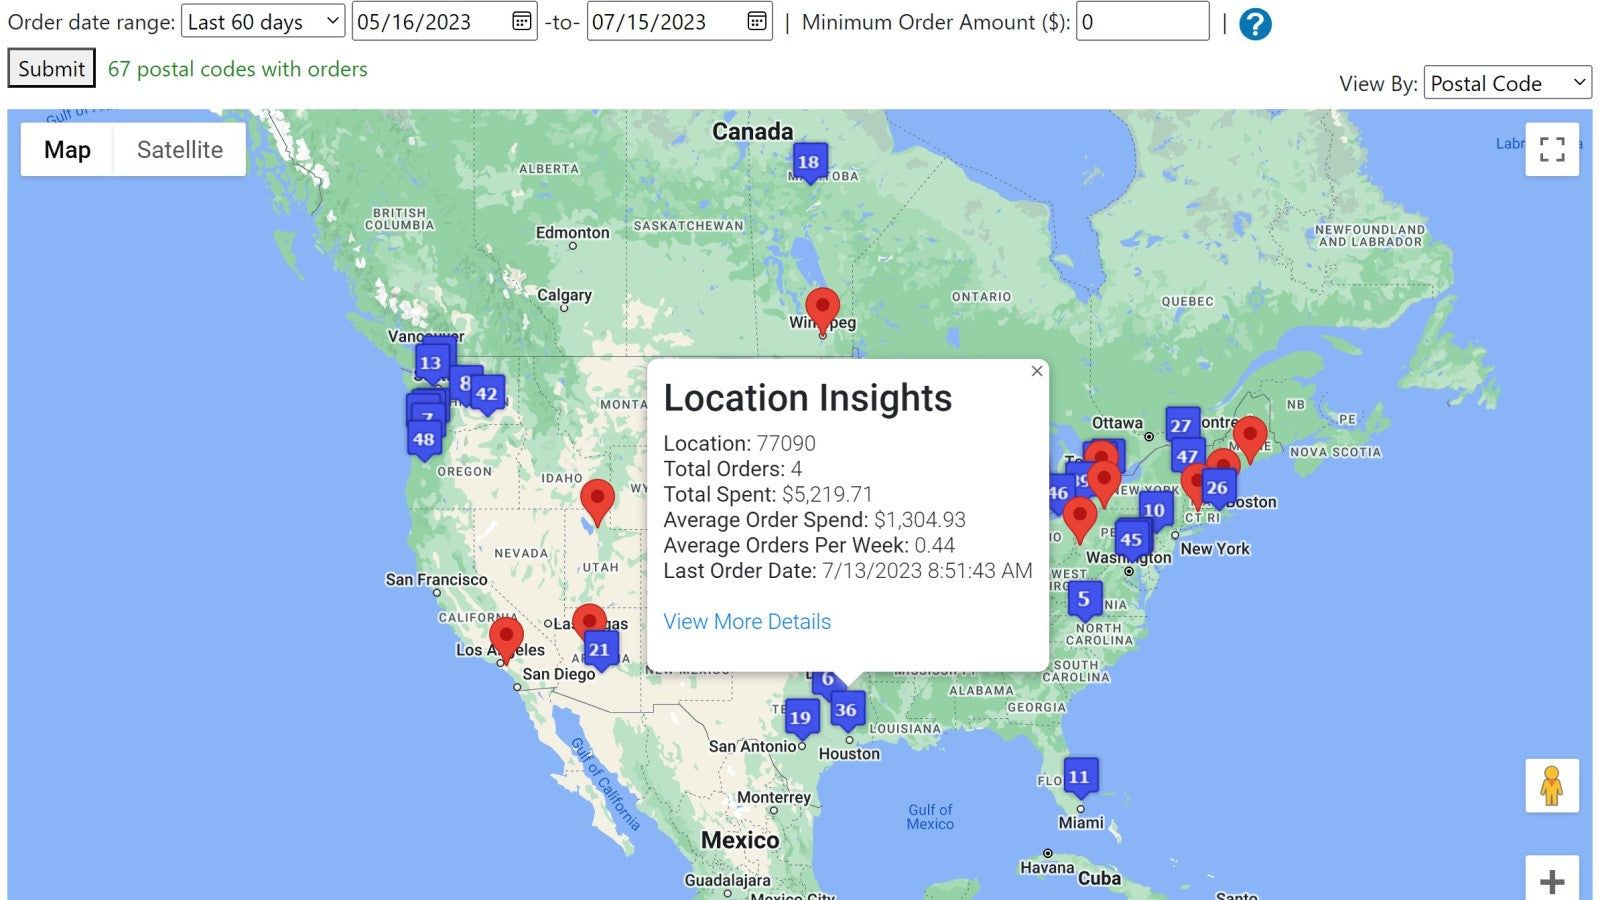 Postal code/Province details showing order activity and insights